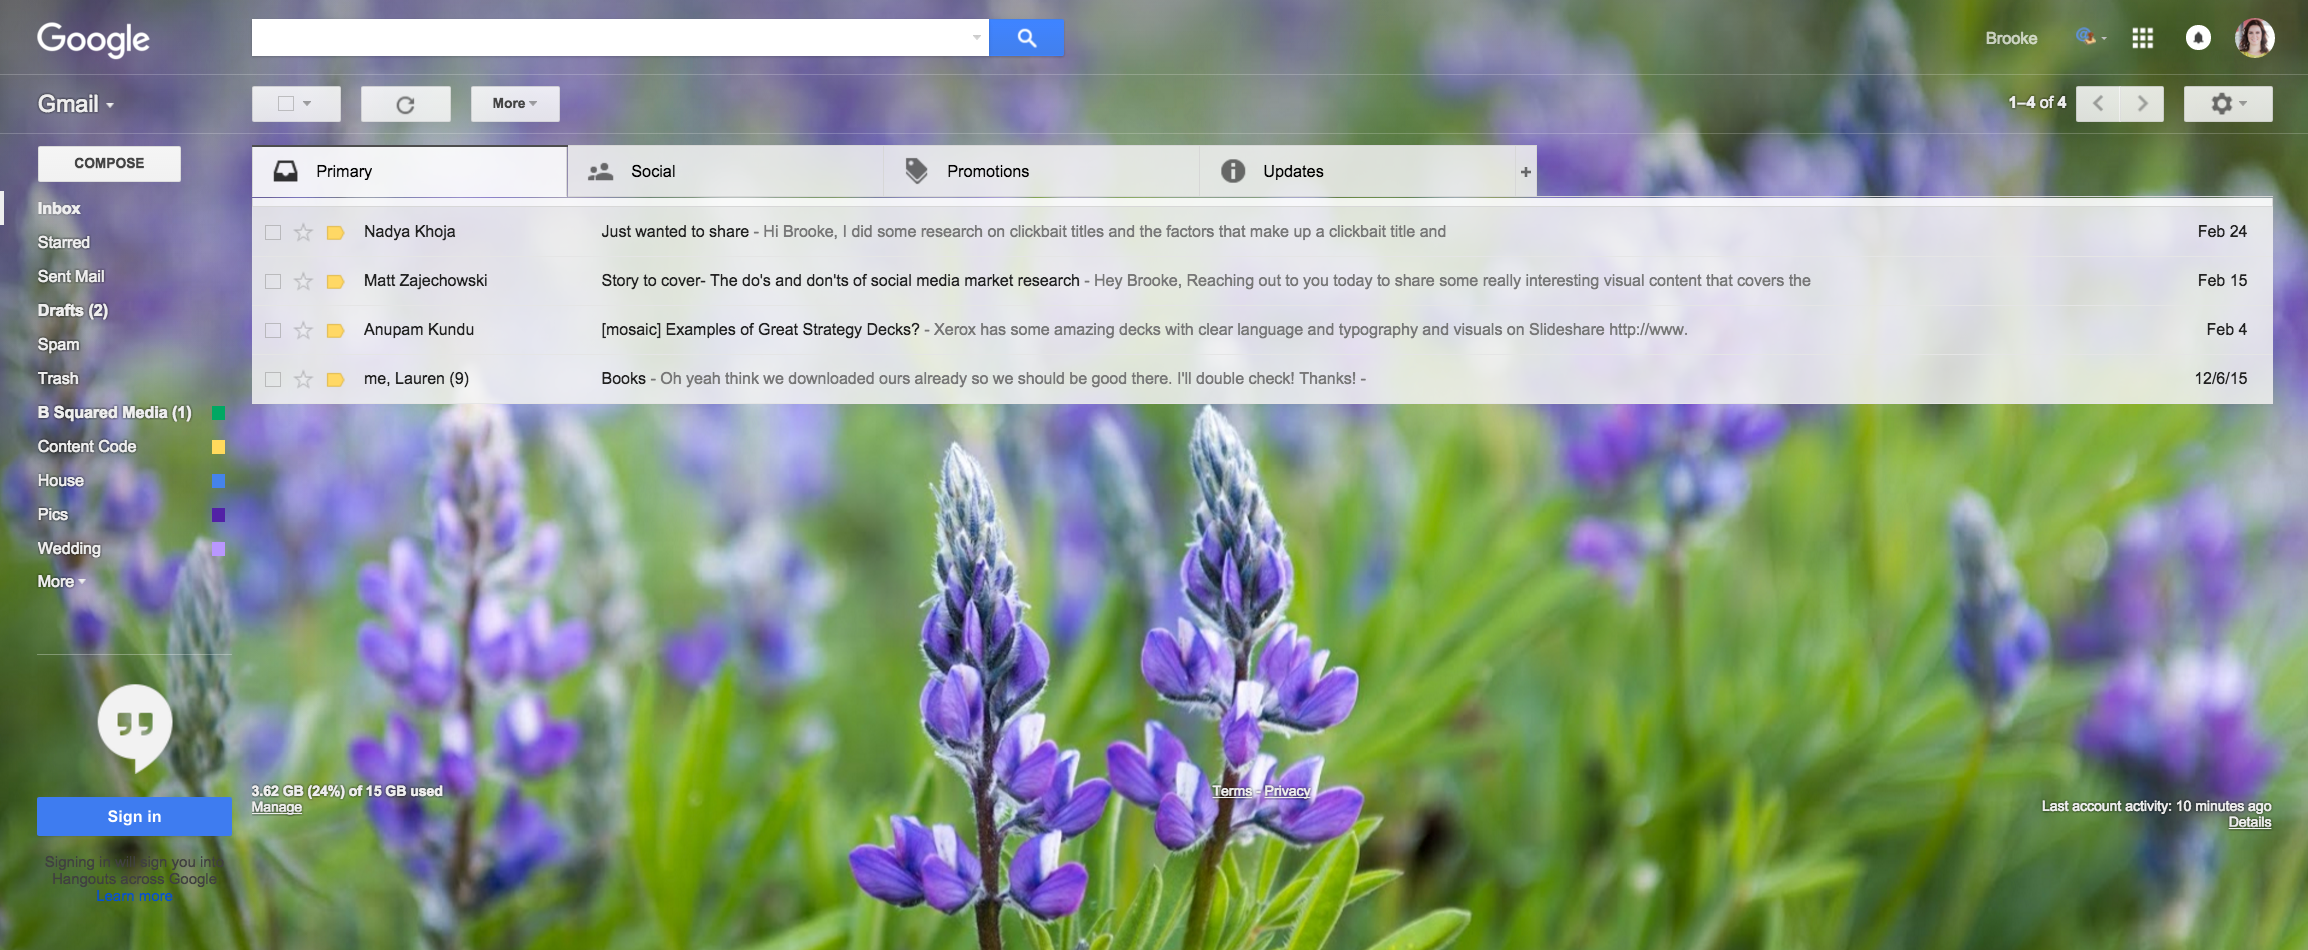 gmail-customize-or-personalize-the-offer